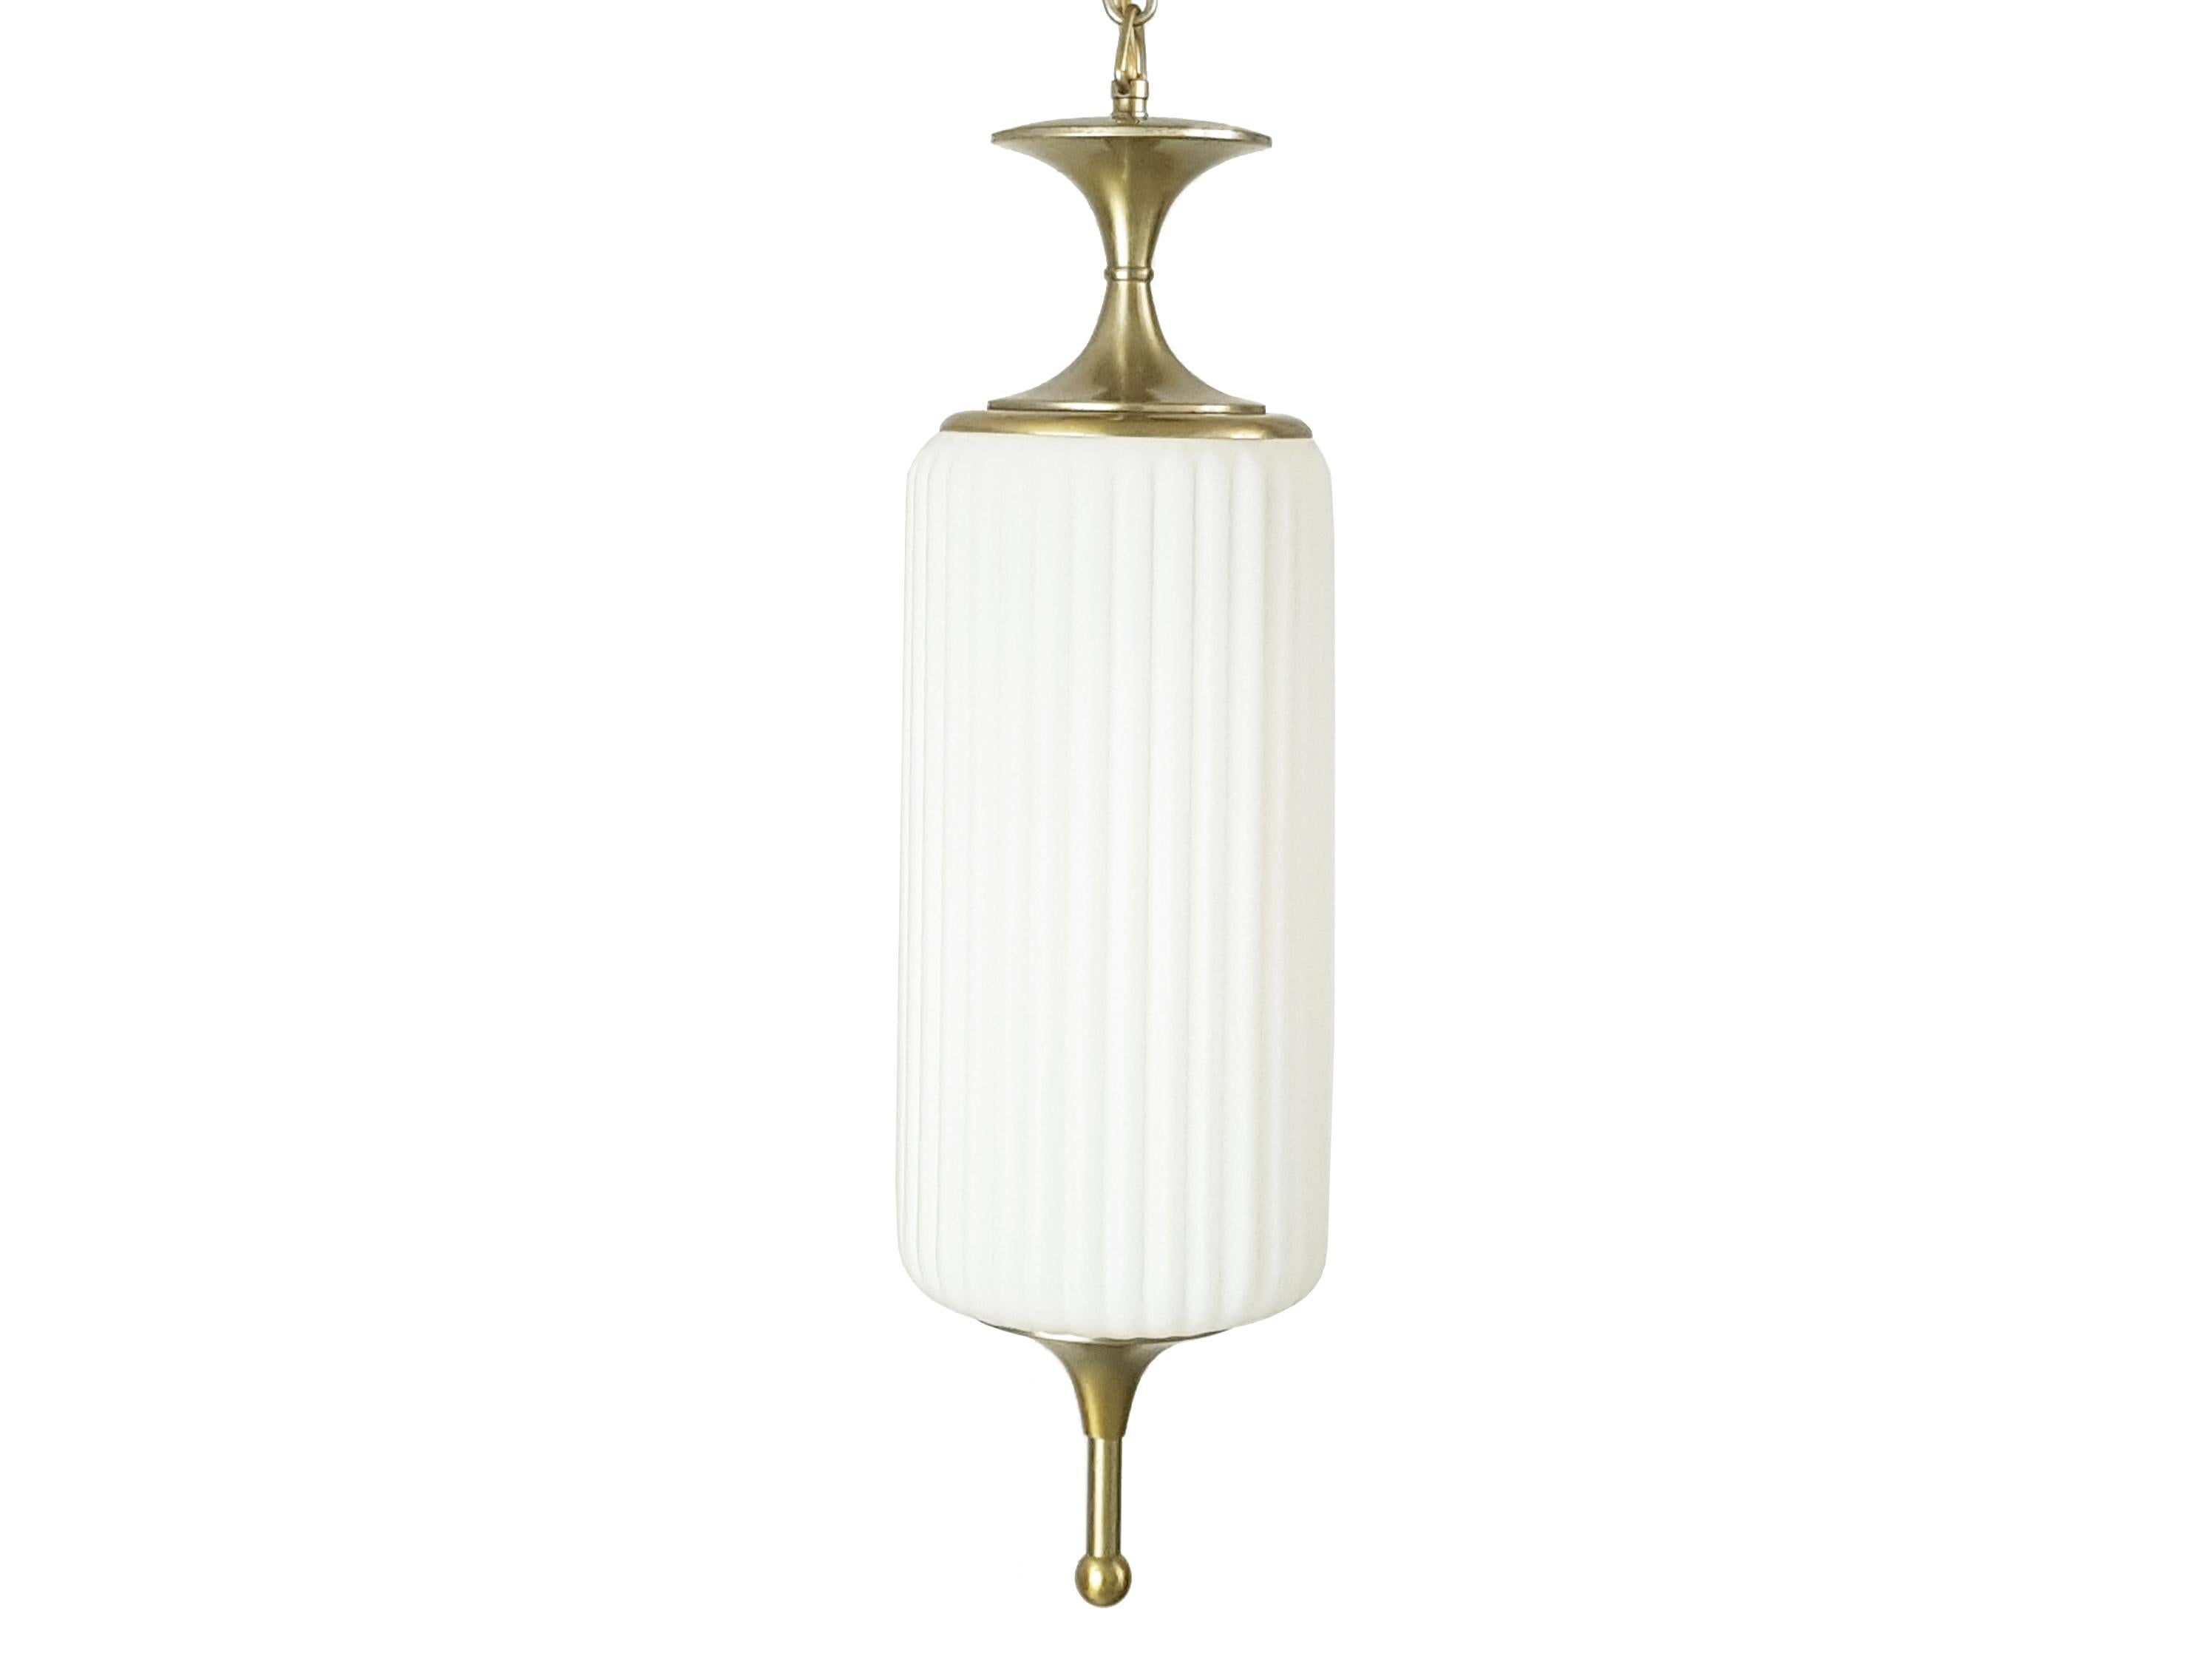 Opaline Glass & Nickel Plated Metal 1960s Pendant Lamp by Reggiani, Italy For Sale 3